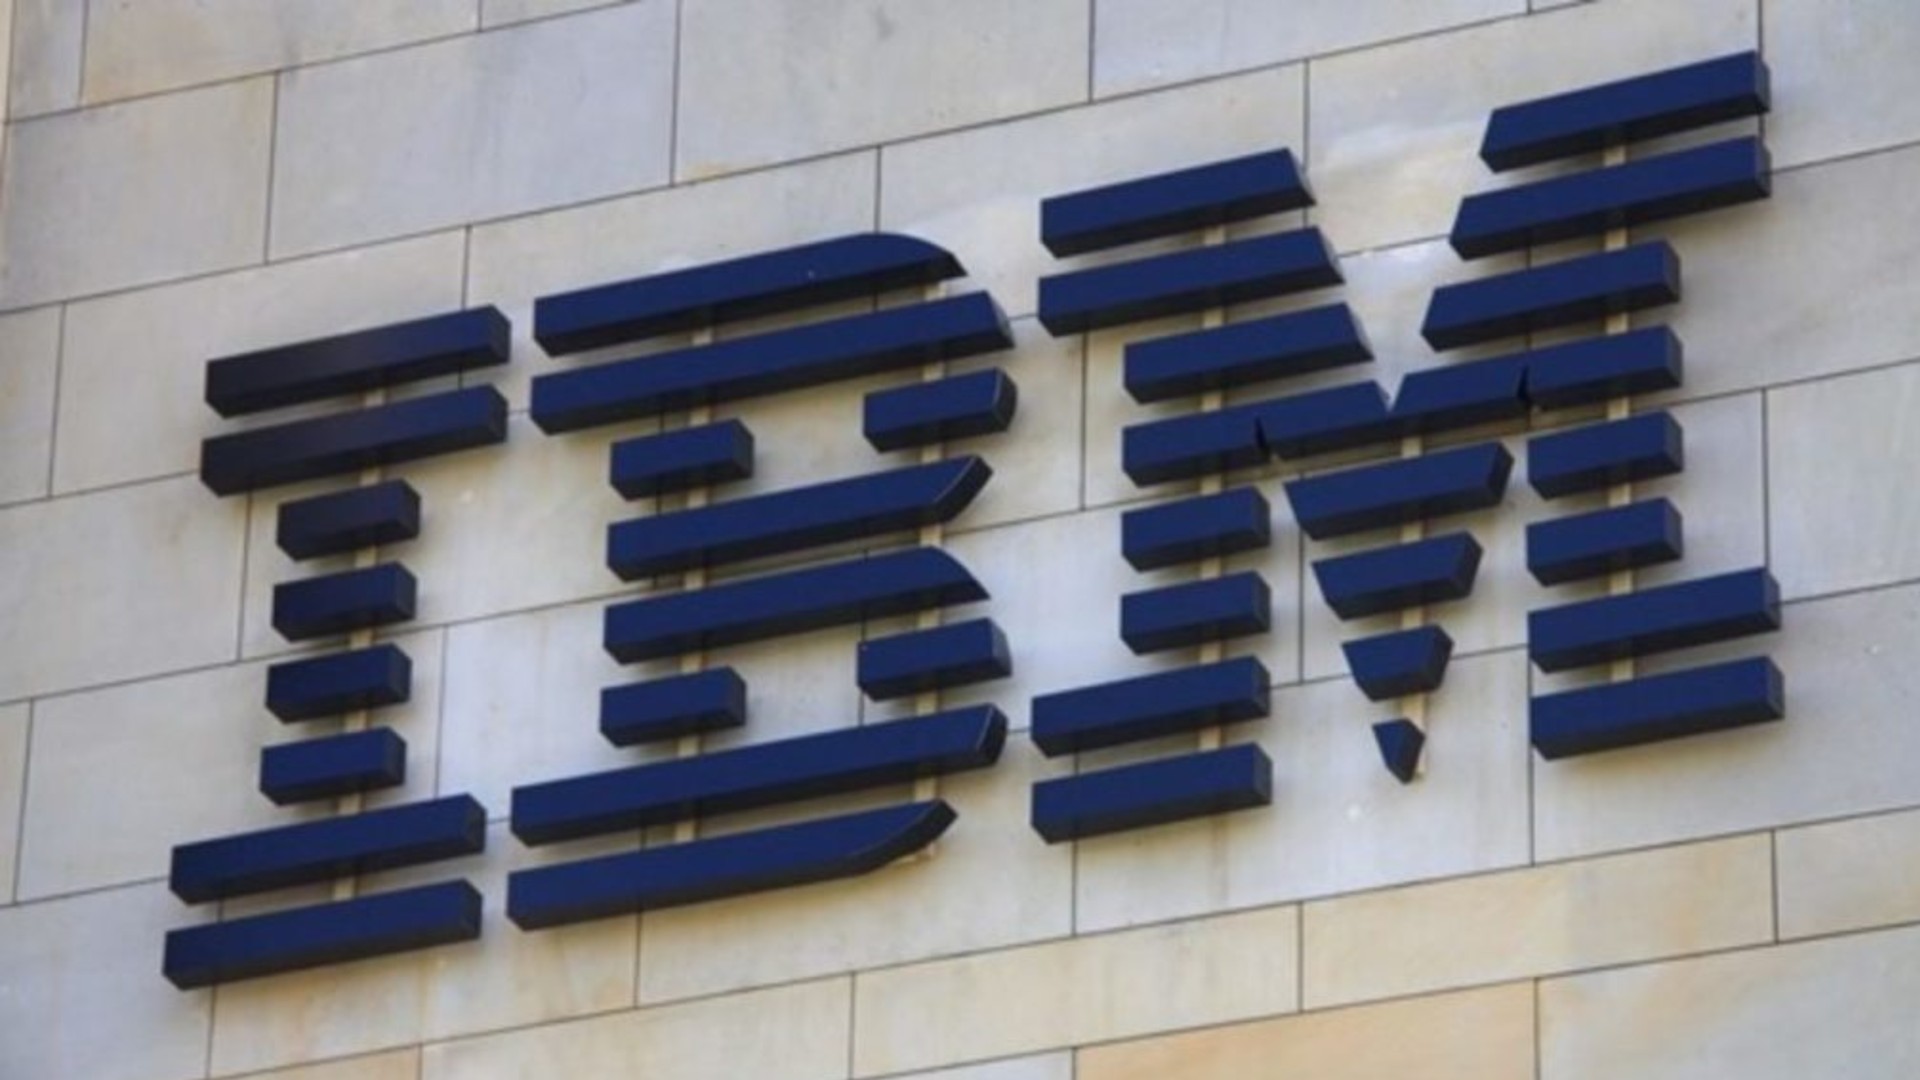 Suddenly, Ibm’s Top Cloud Expert Resigns, Causing Shares To Dip To A Five-month Low